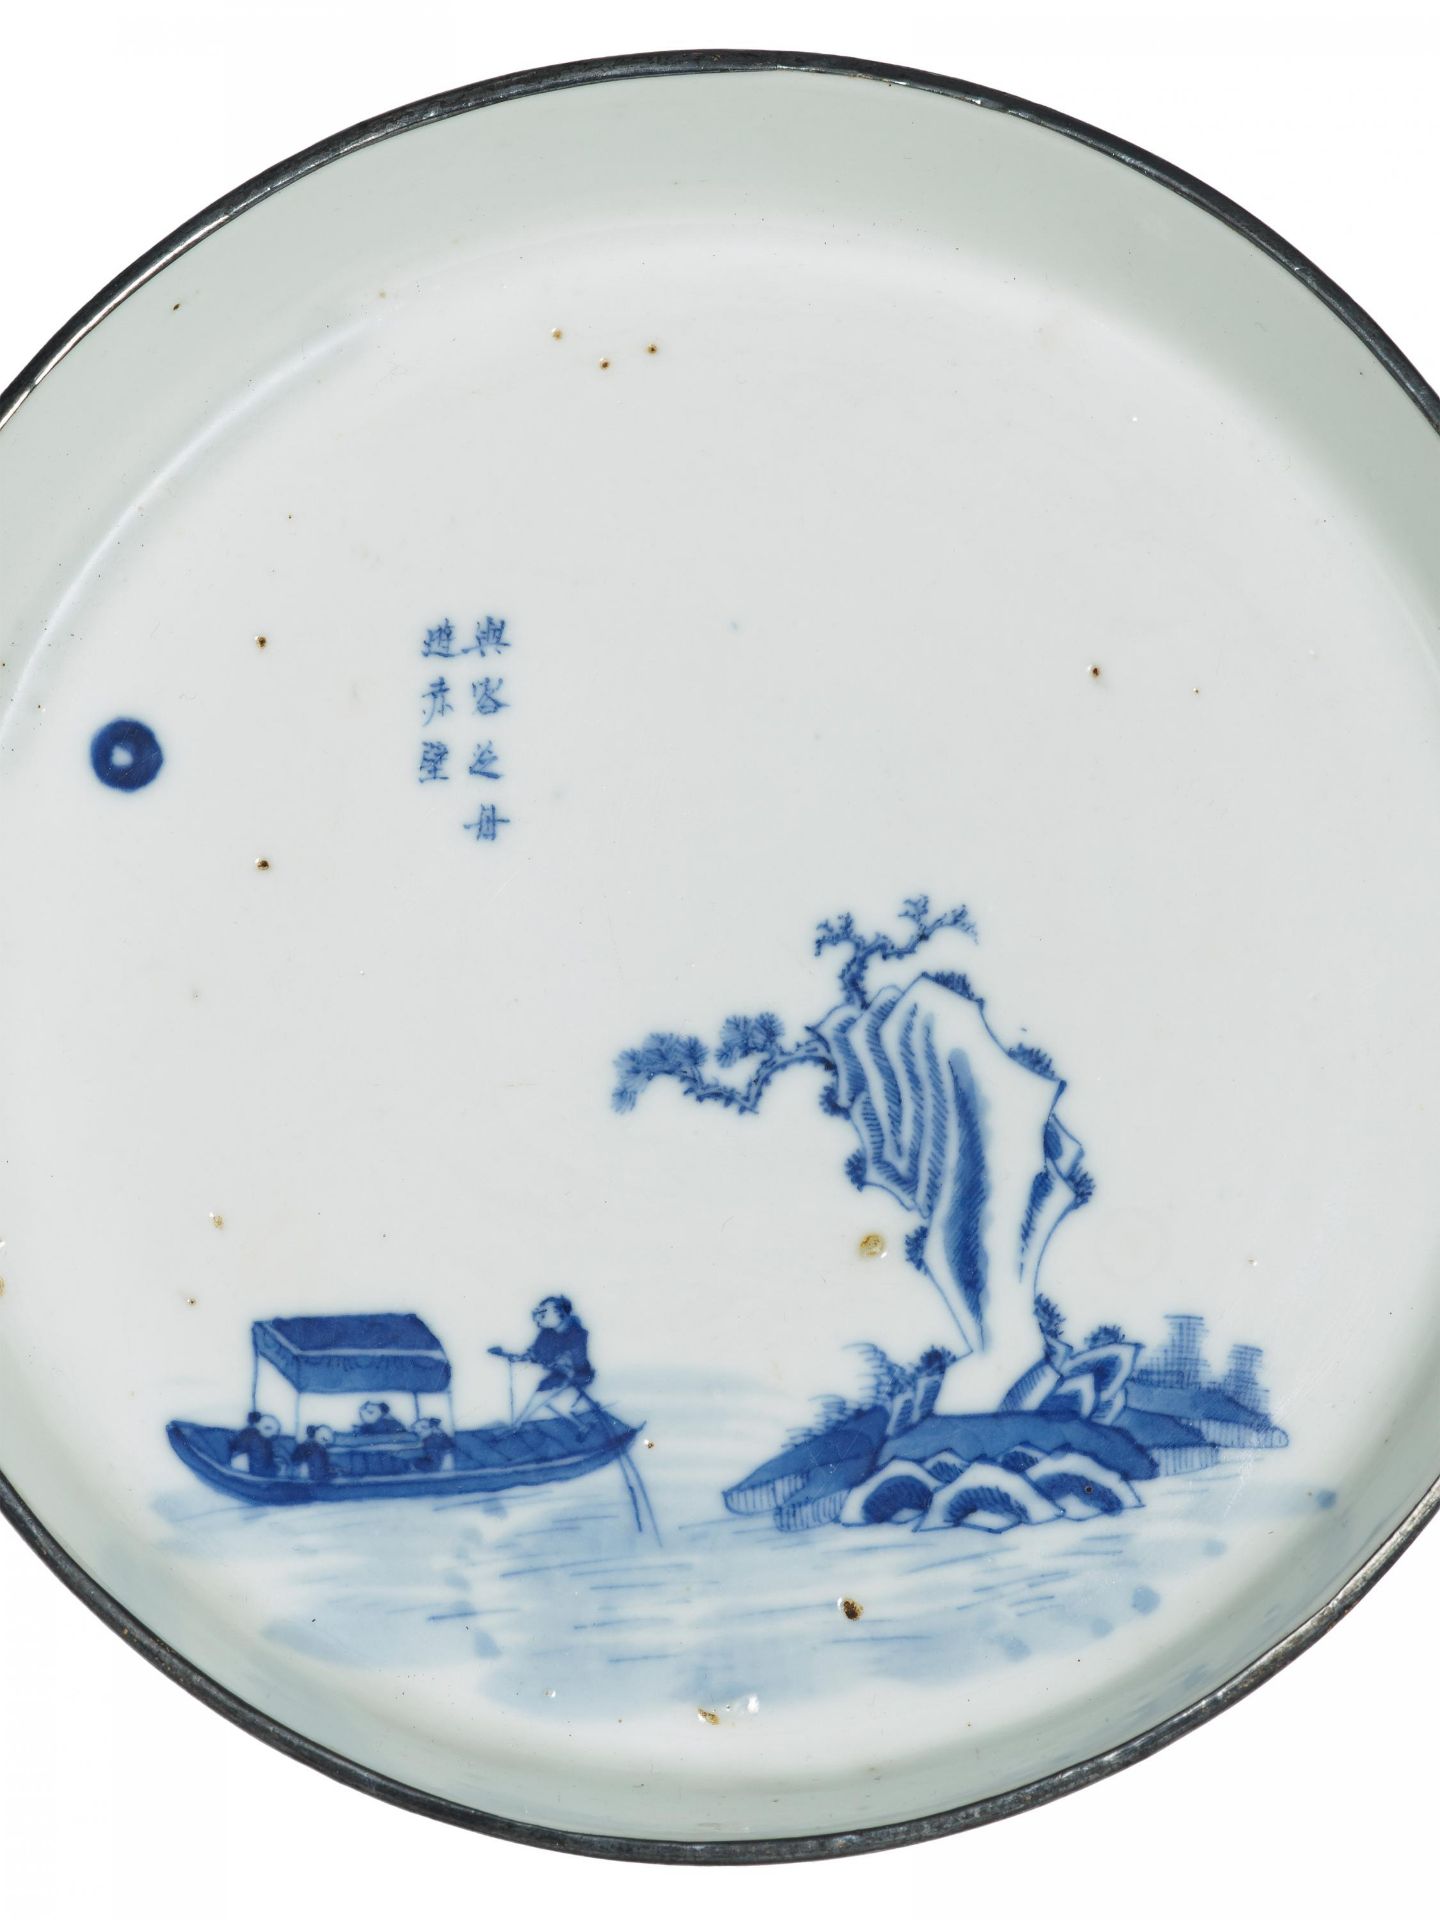 19 OBJECTS FROM FOUR TEA SETS WITH LANDSCAPES AND POEMS. Origin: China for Vietnam. Date: 19th c. - Bild 3 aus 3